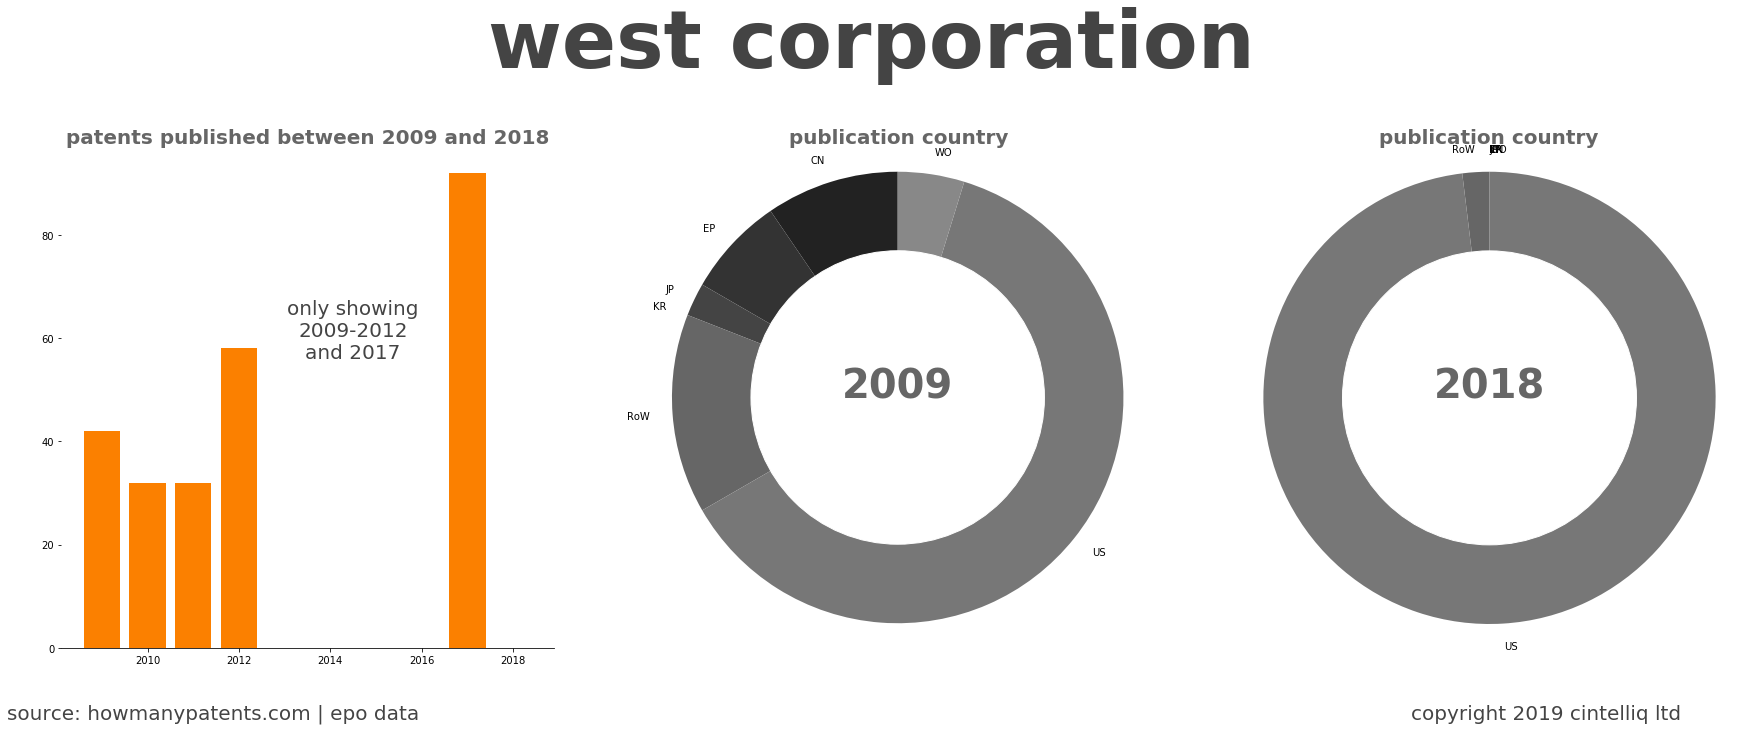 summary of patents for West Corporation